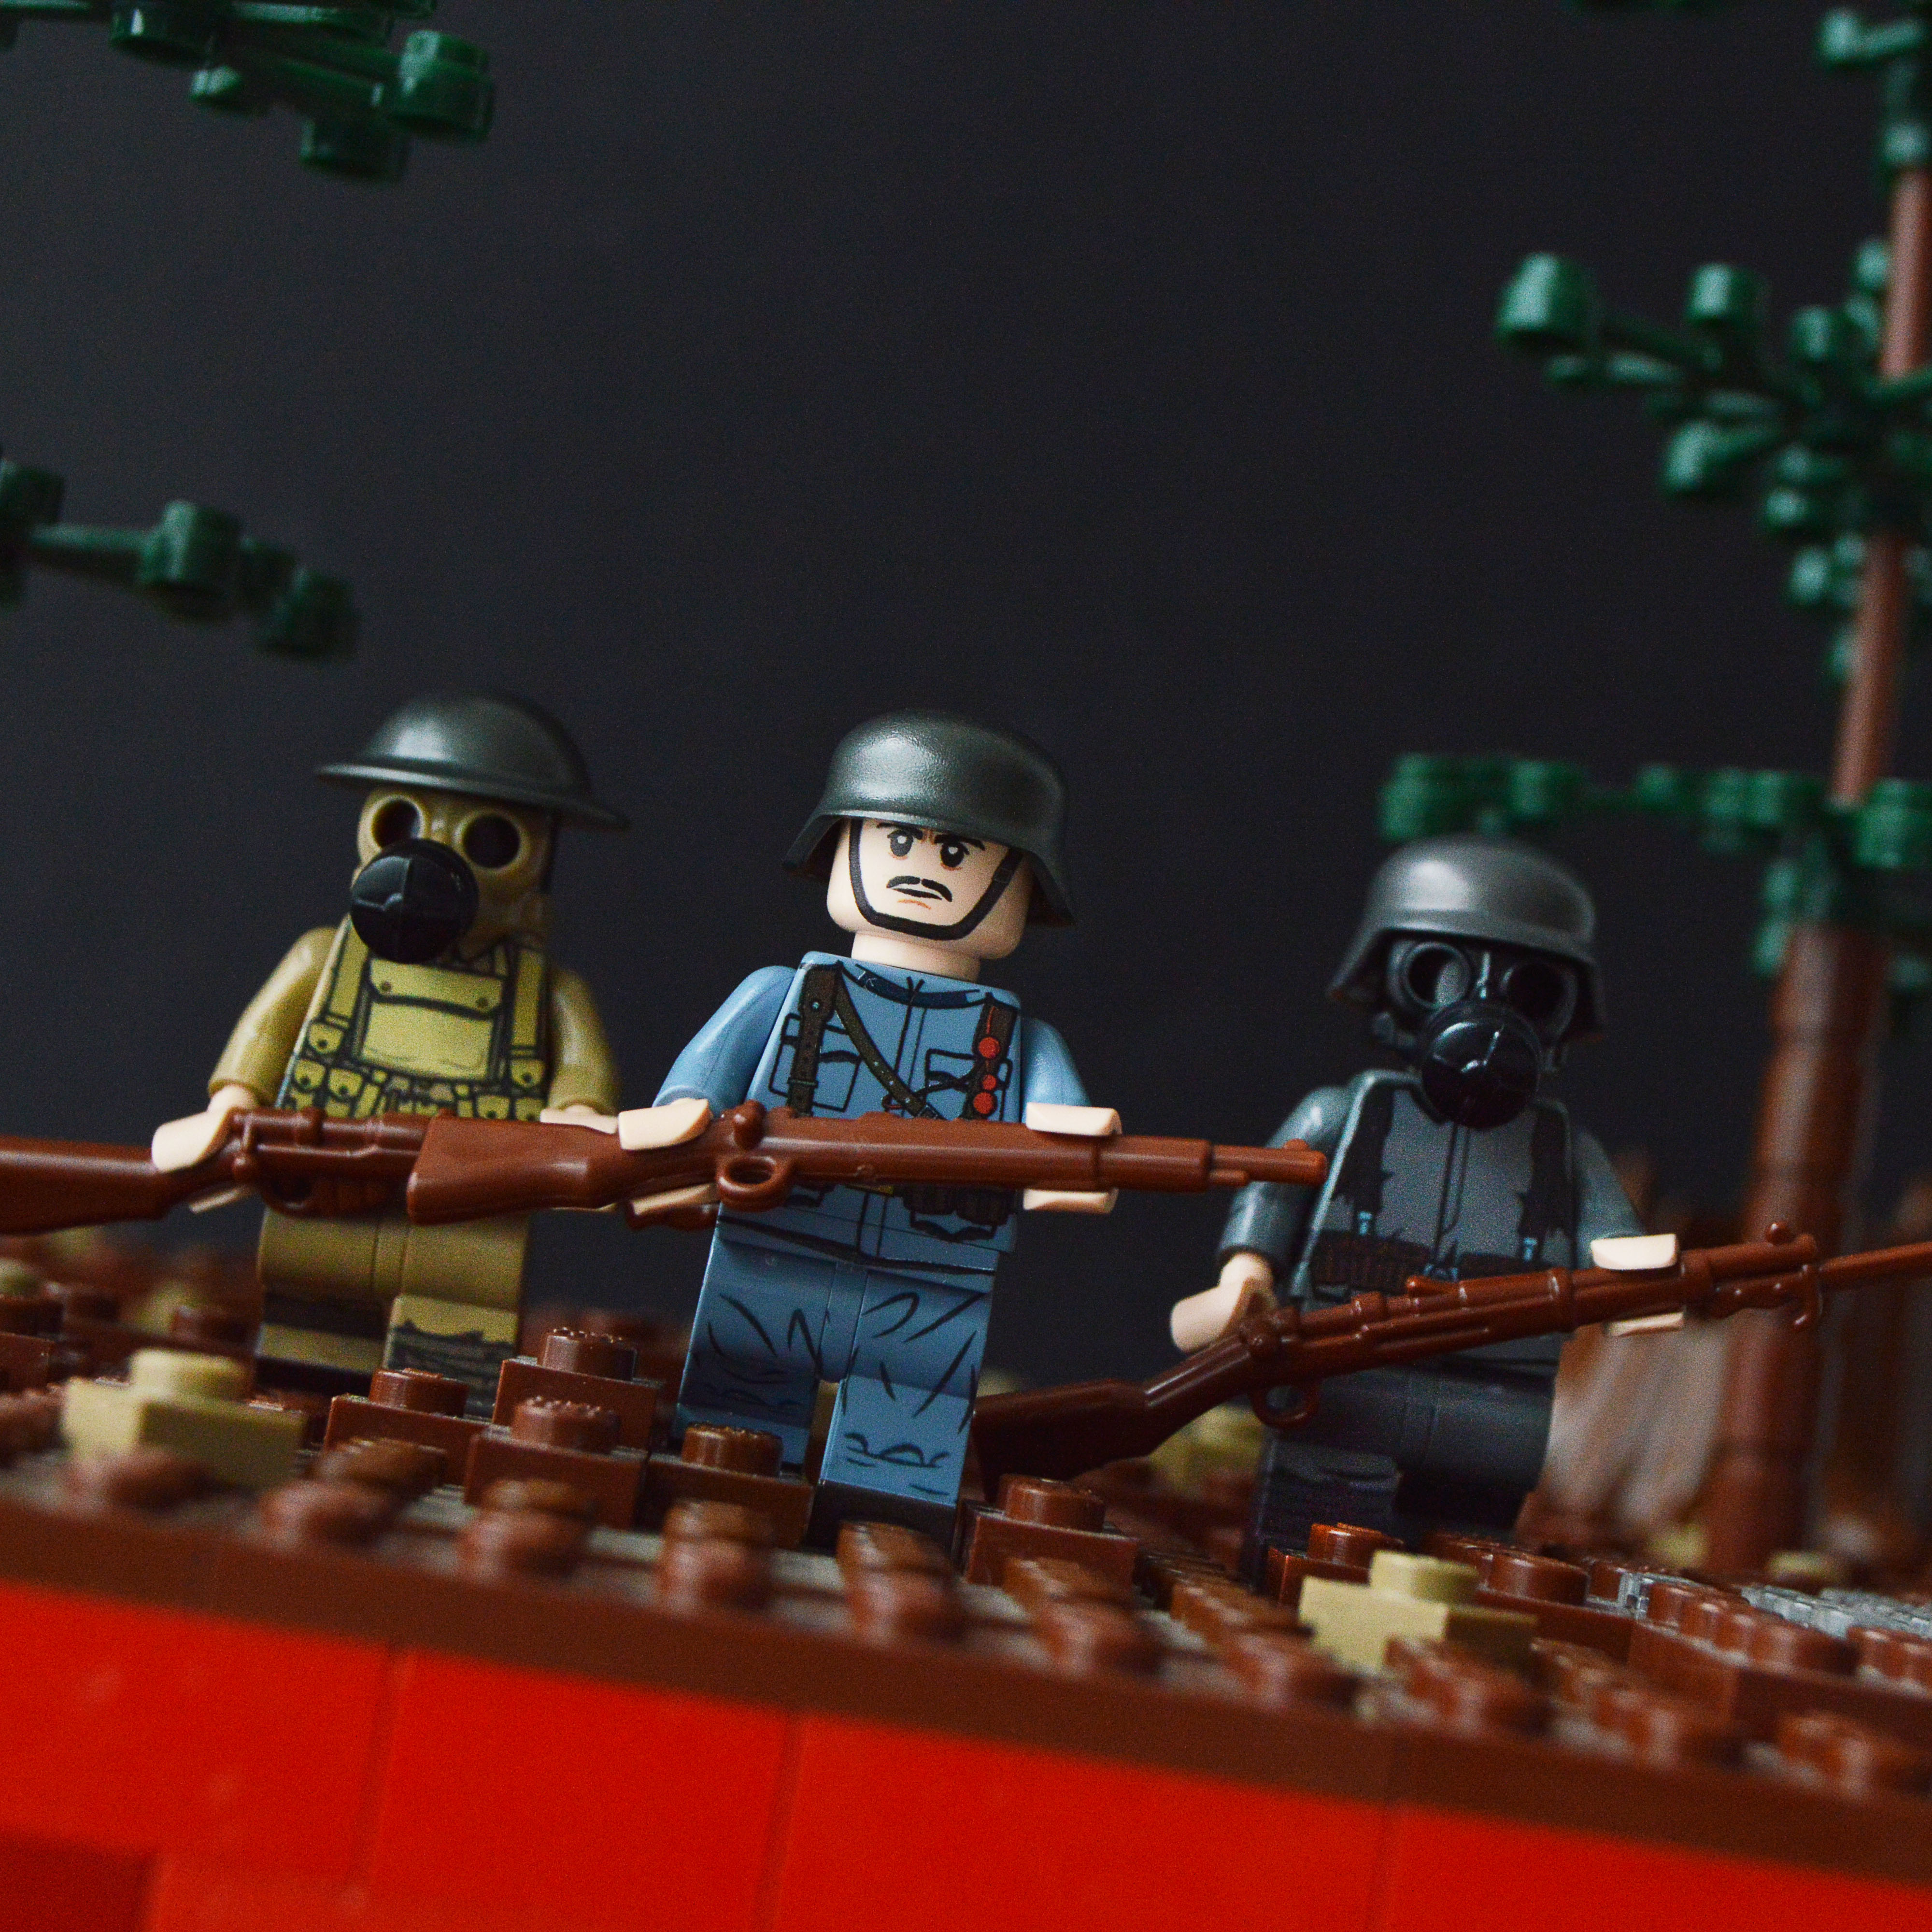 on Twitter: "⭐RESTOCKED⭐ Our WW1 British Soldier with Gas Mask, German Soldier with Gas Mask and Austro-Hungarian Soldier Minifigures have now been restocked. Grab yours today! - https://t.co/ymwlluR0Sg - #unitedbricks #ww1 #